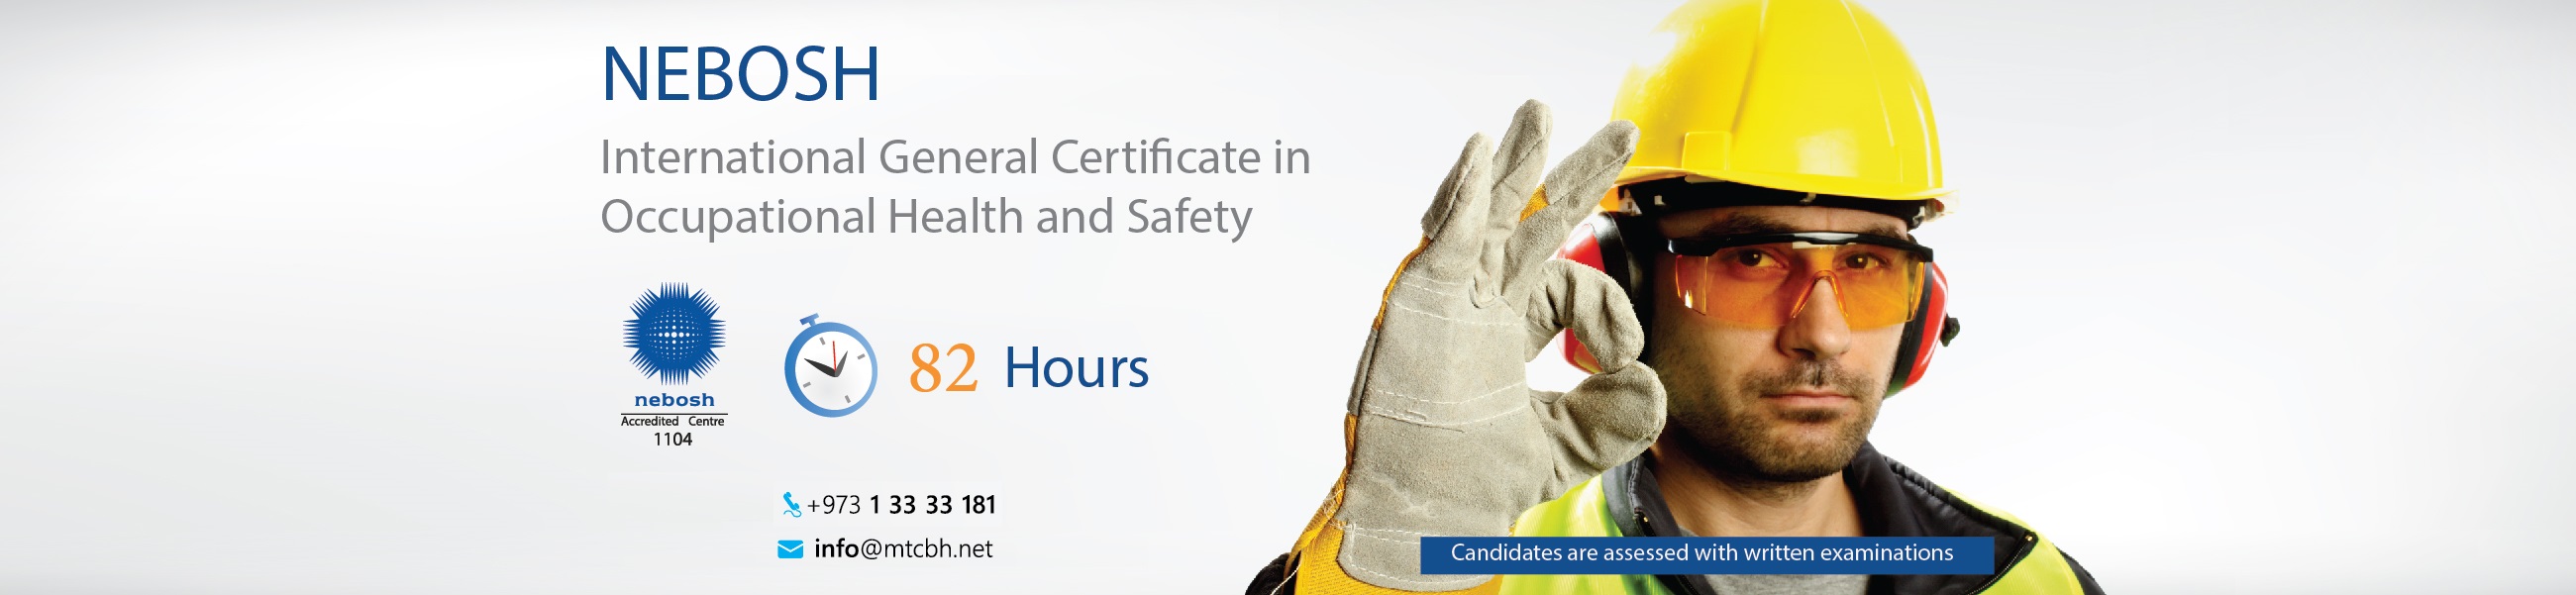 Website - International General Certificate in Occupational Health and Safety-01.jpg